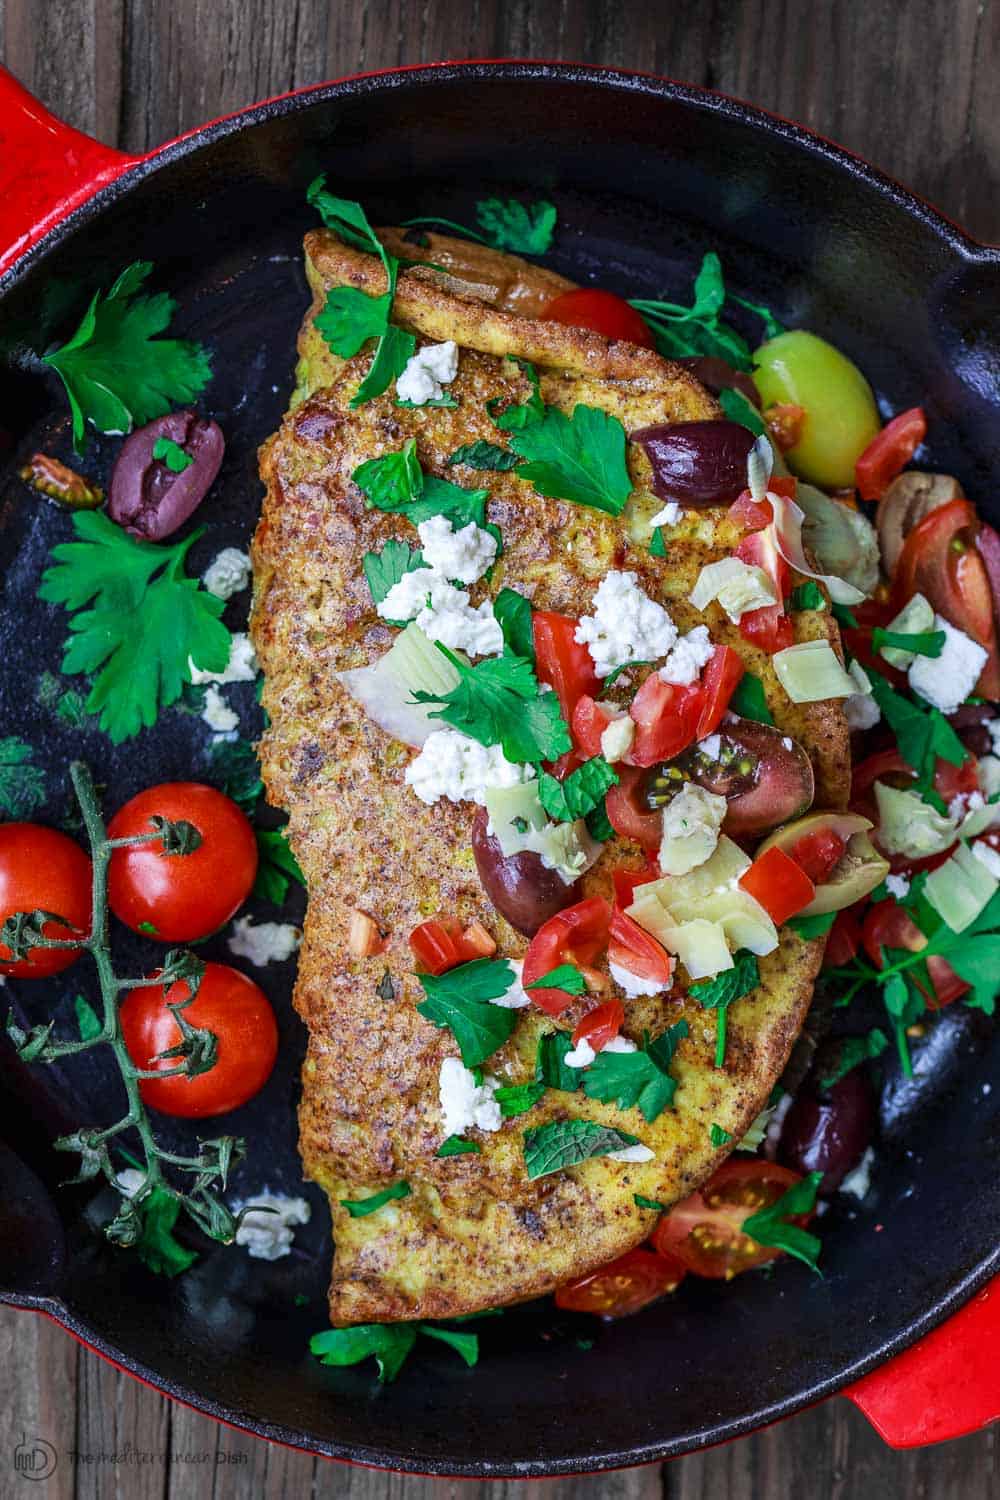 Loaded Mediterranean Omelette Recipe | The Mediterranean Dish. Perfectly-seasoned omelette loaded with fresh herbs and Mediterranean favorites like tomato, artichokes, feta and more. There is a secret ingredient that makes this omelette a little extra airy and fluffly! From TheMediterraneanDish.com